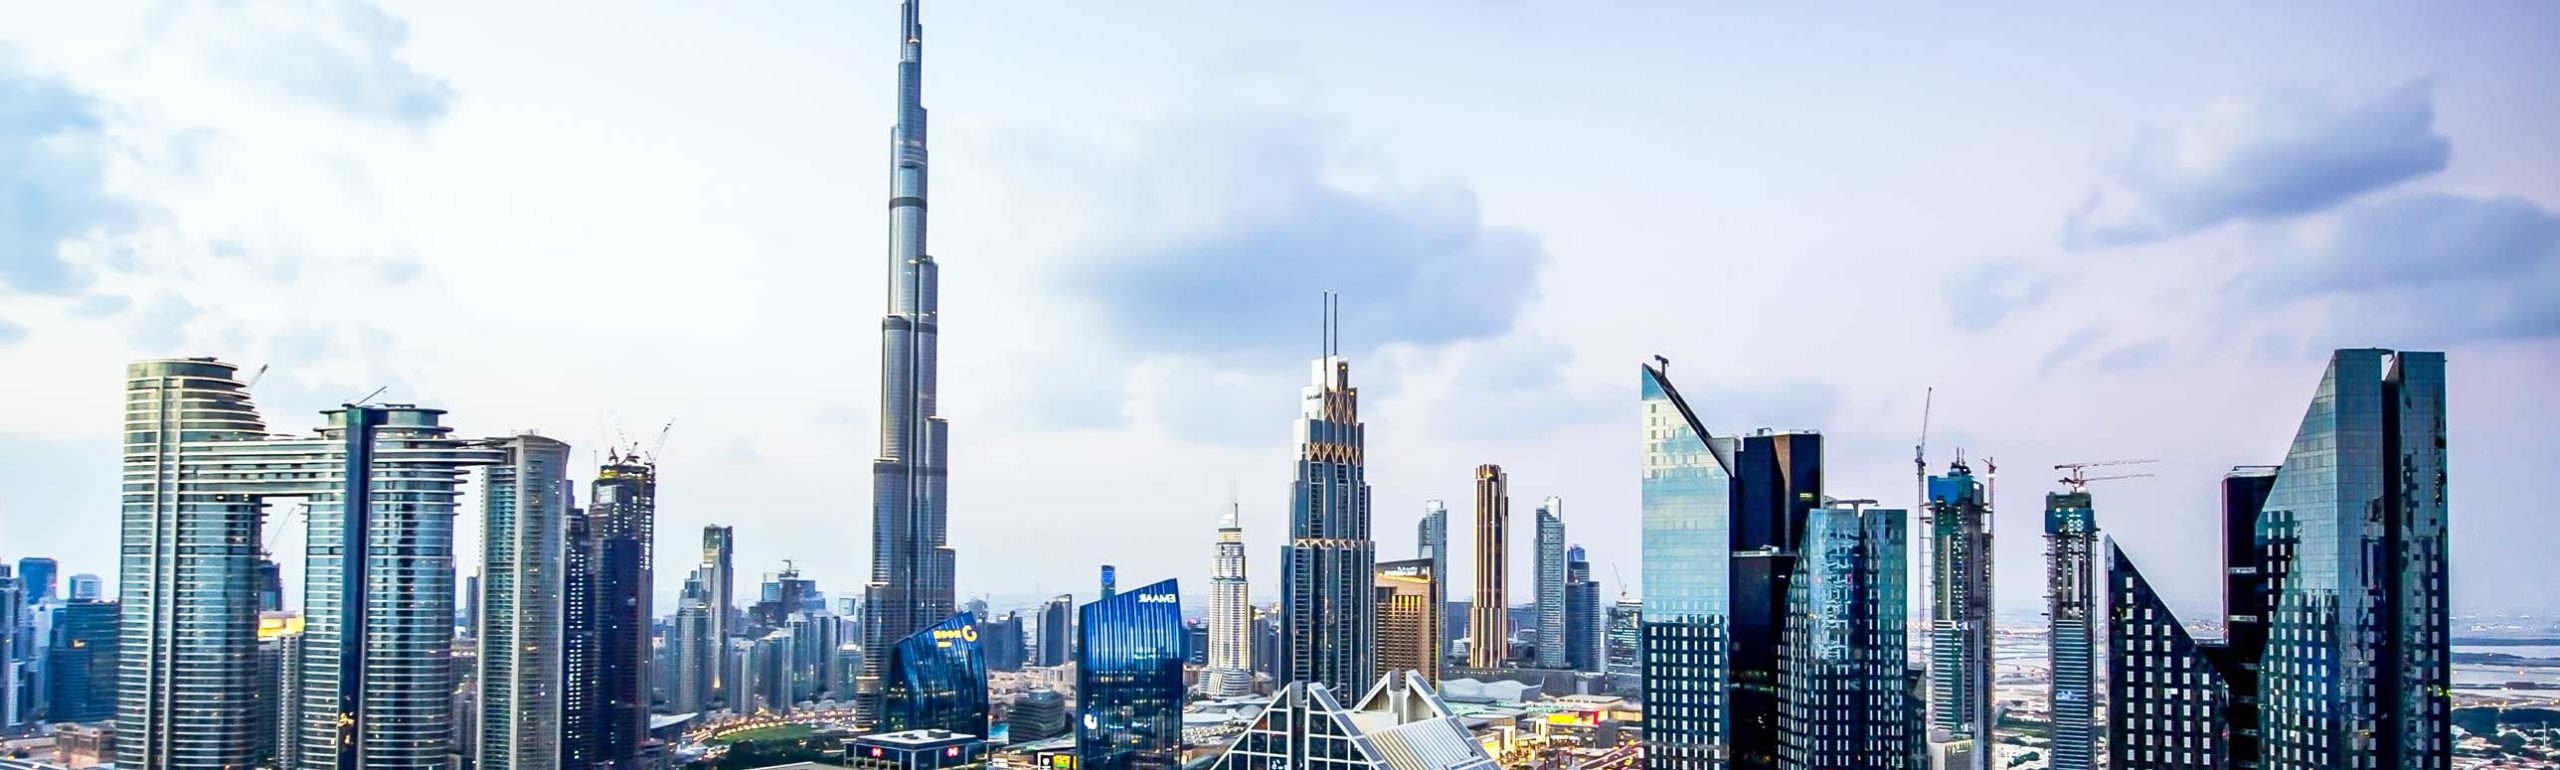 Our TRB office in Dubai gives us a strategic position in the Middle East and Africa